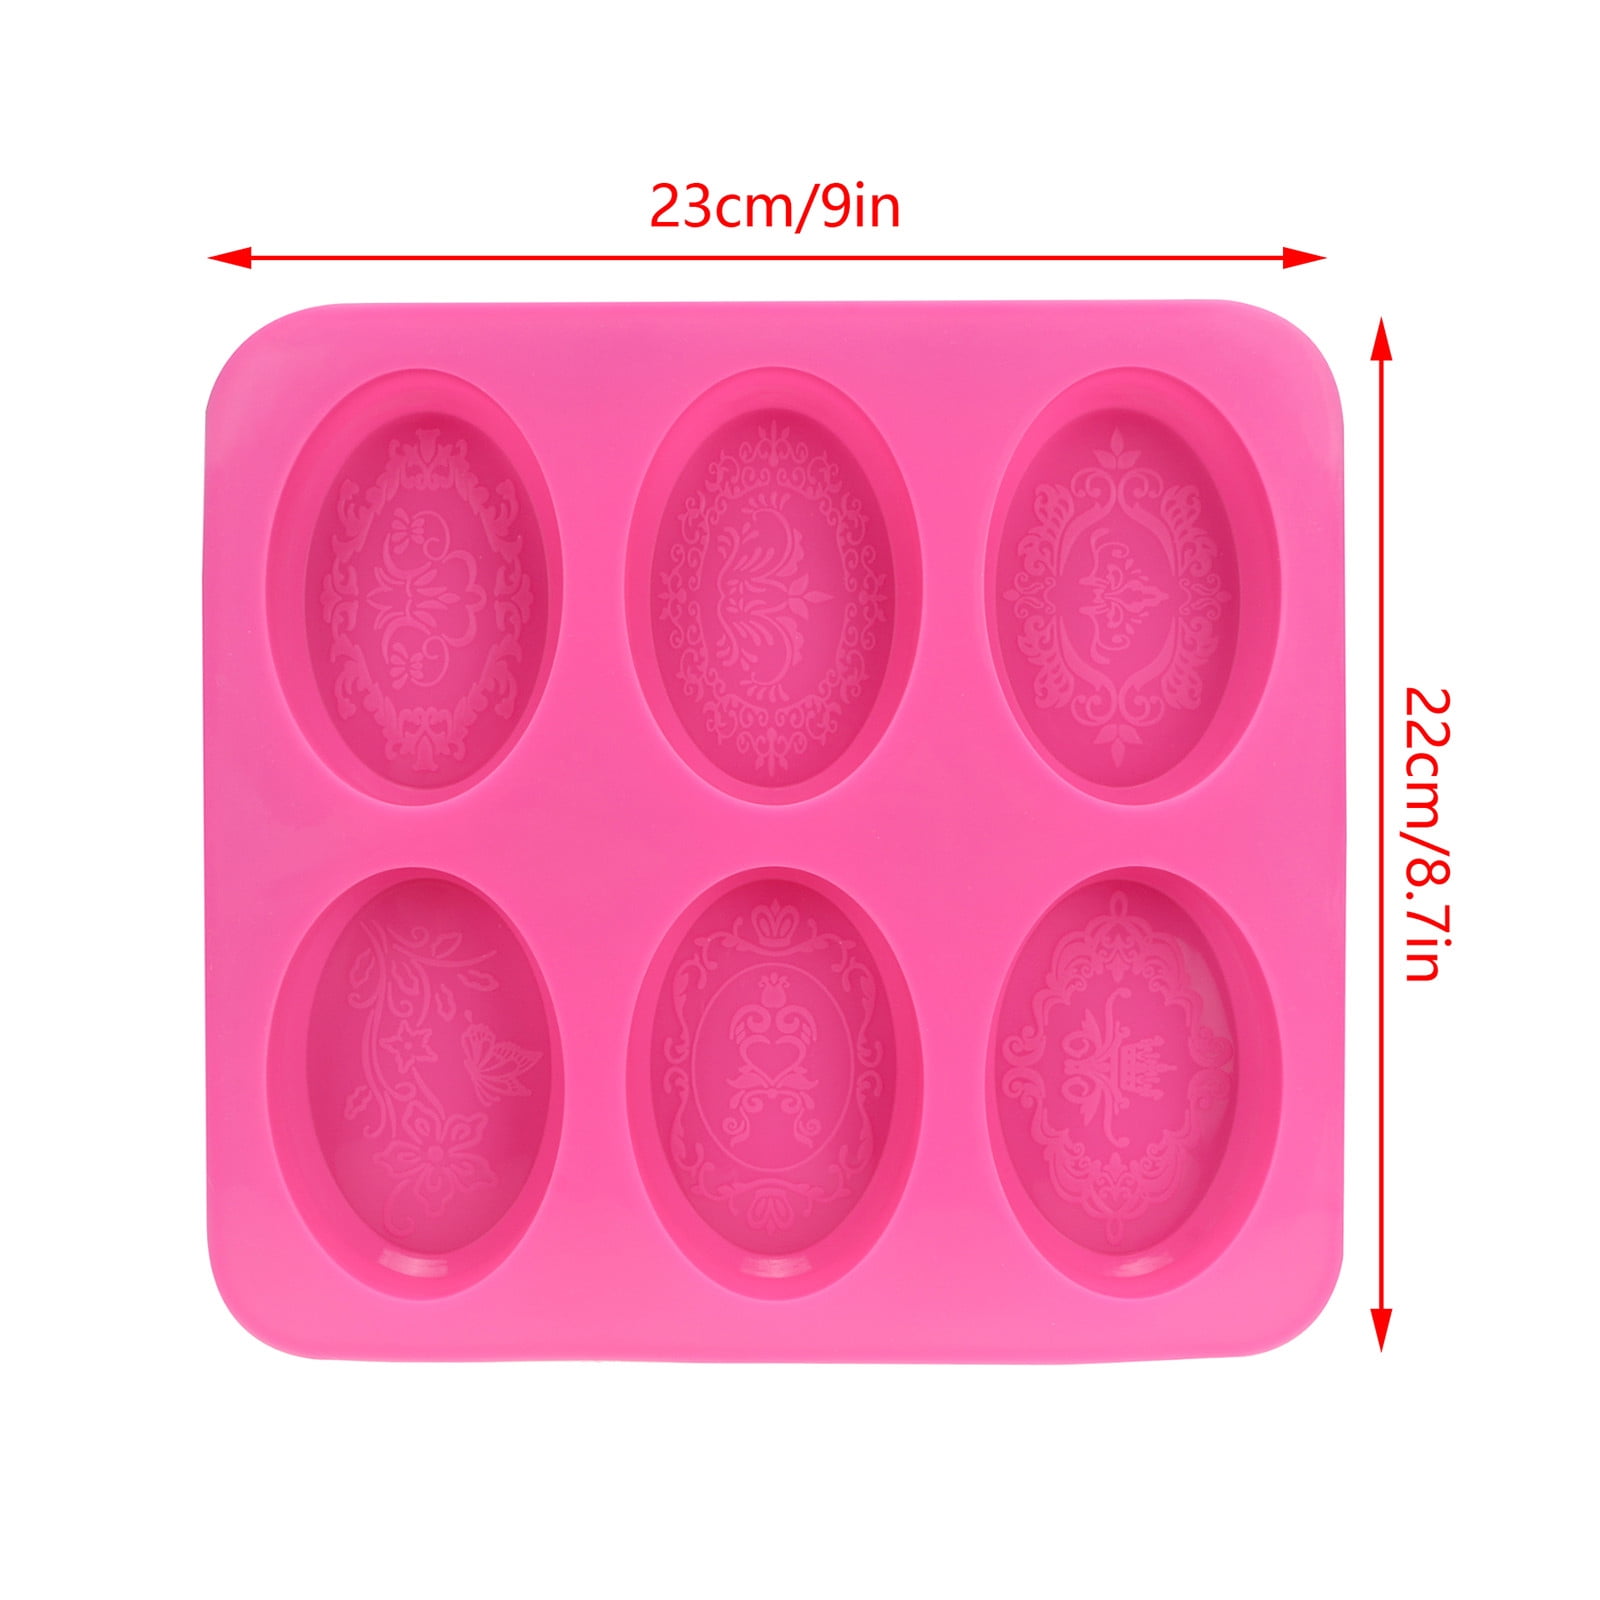 Kiplyki Wholesale Six Consecutive Oval Soap Molds, New Silicone Soap Molds,  Lace Pattern Molds 